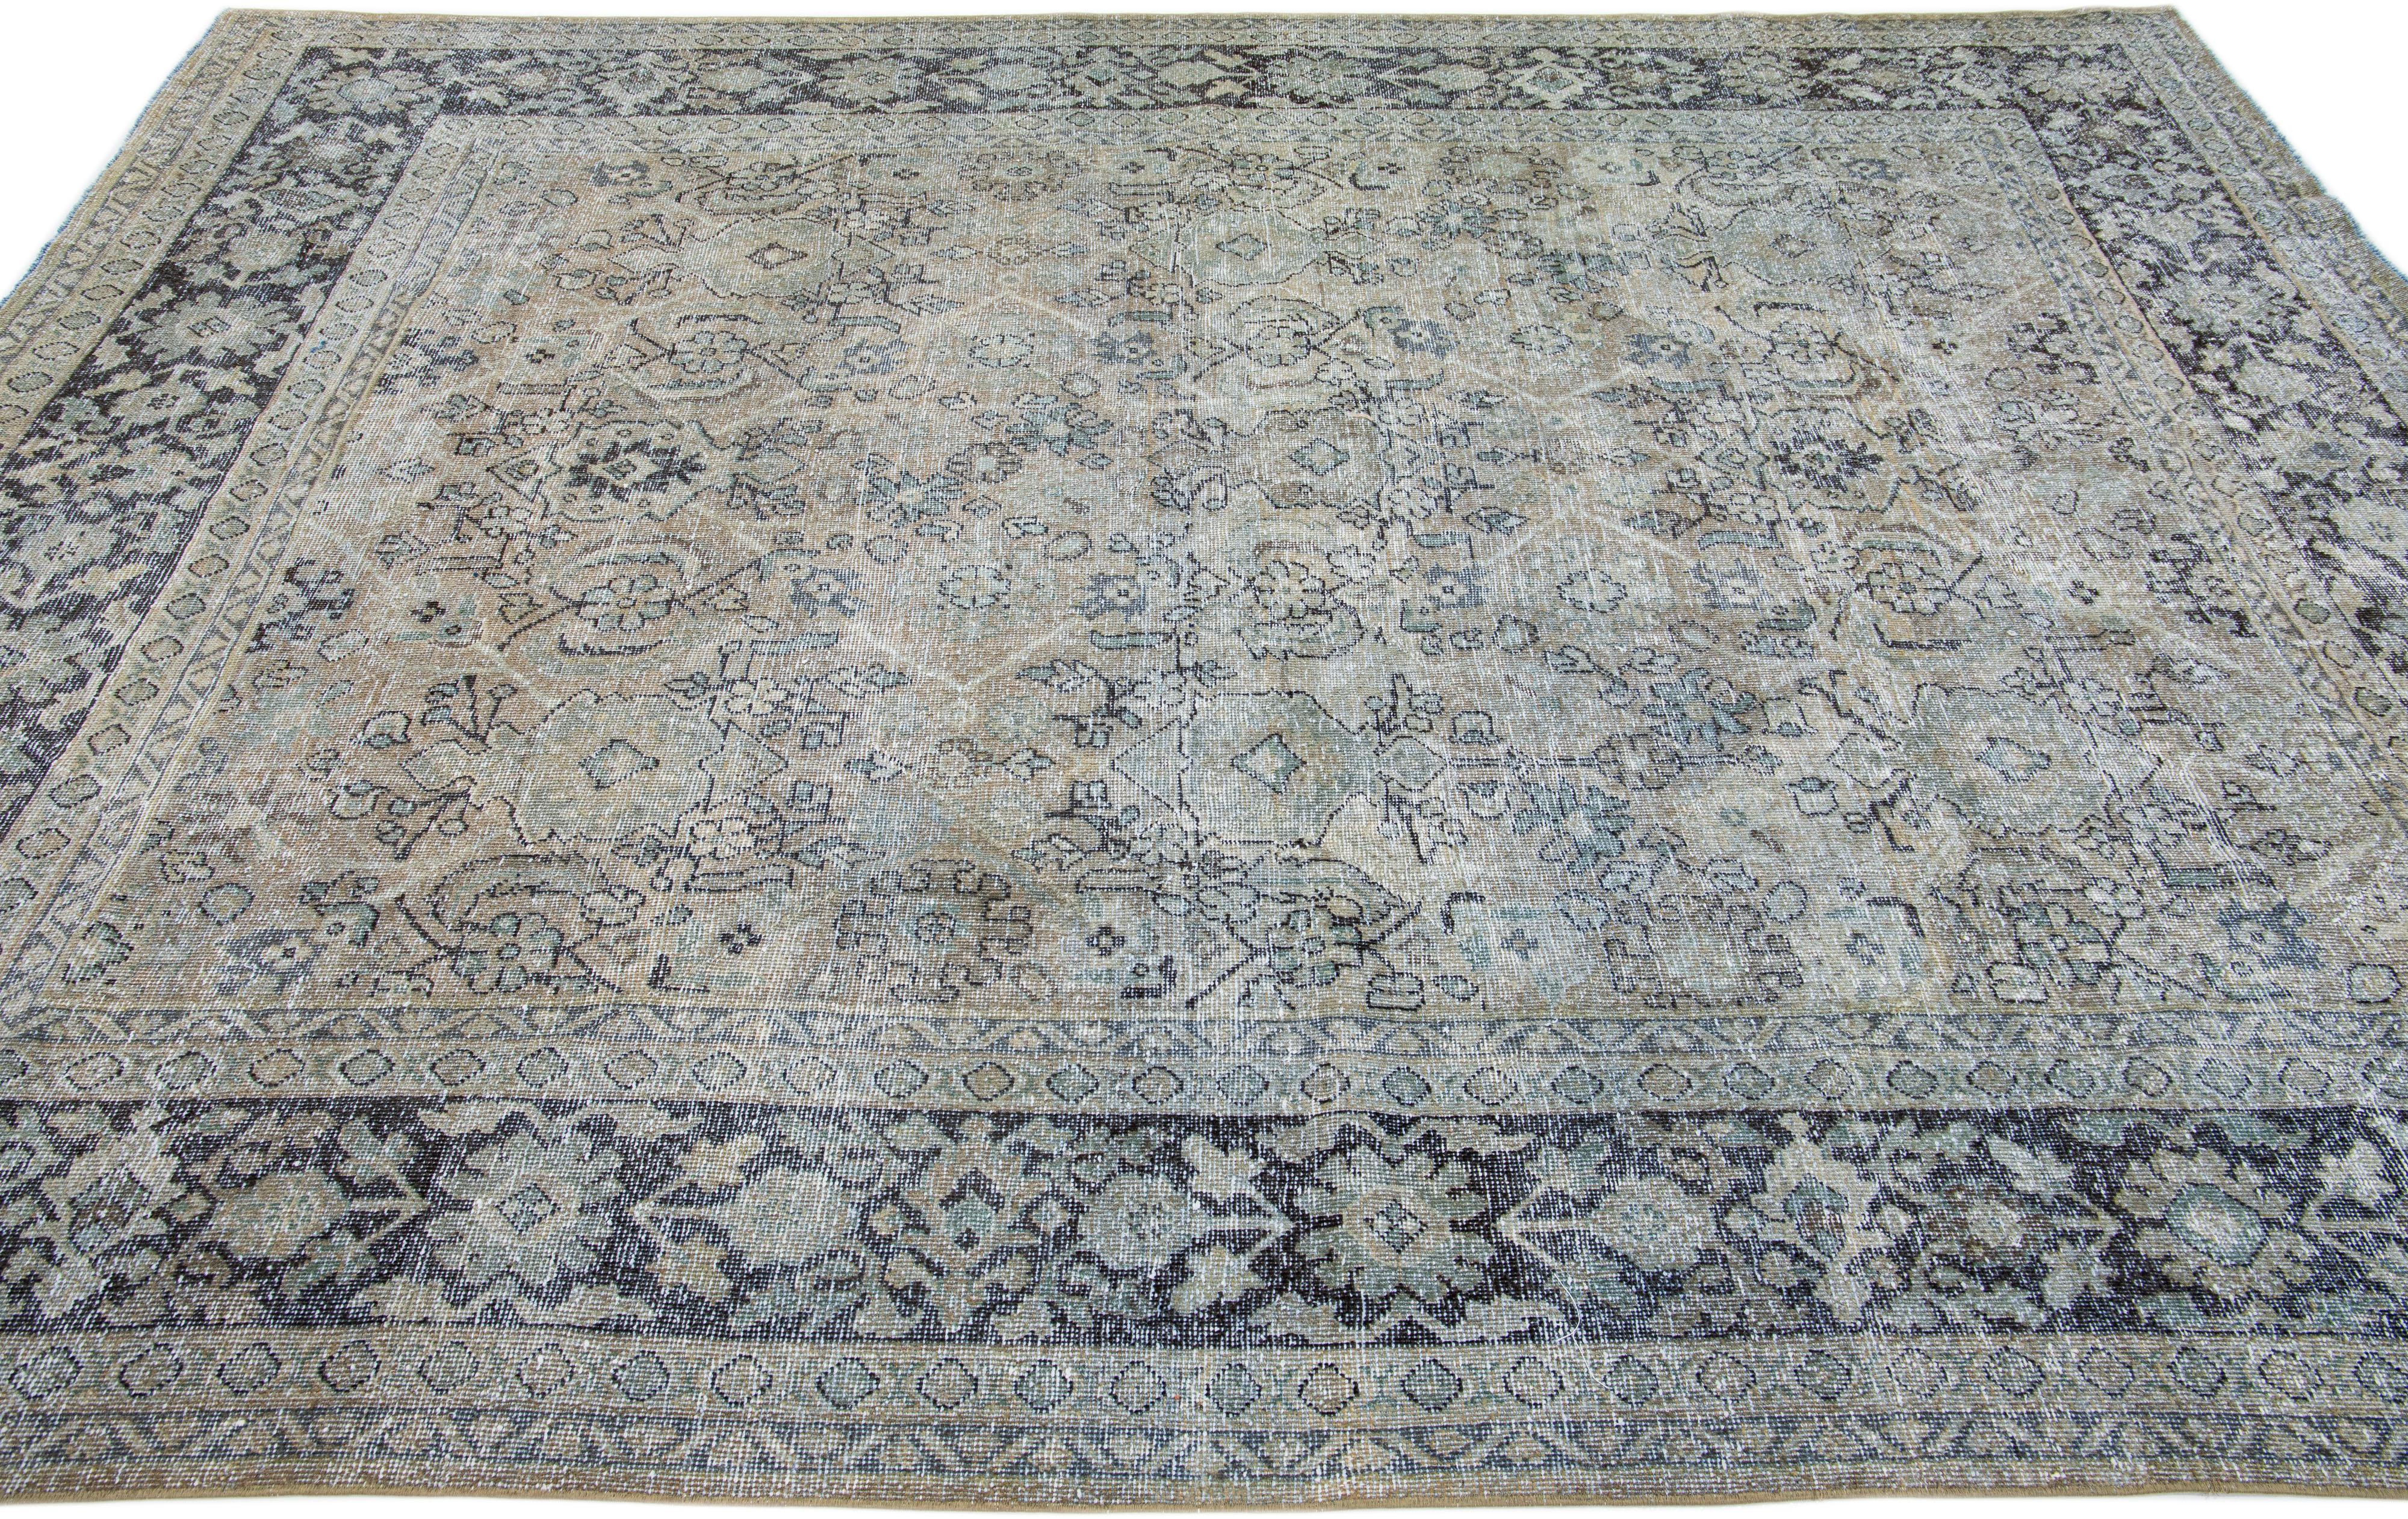 Antique Handmade Grey Persian Tabriz Wool Rug with Shah Abbasi Design In Good Condition For Sale In Norwalk, CT